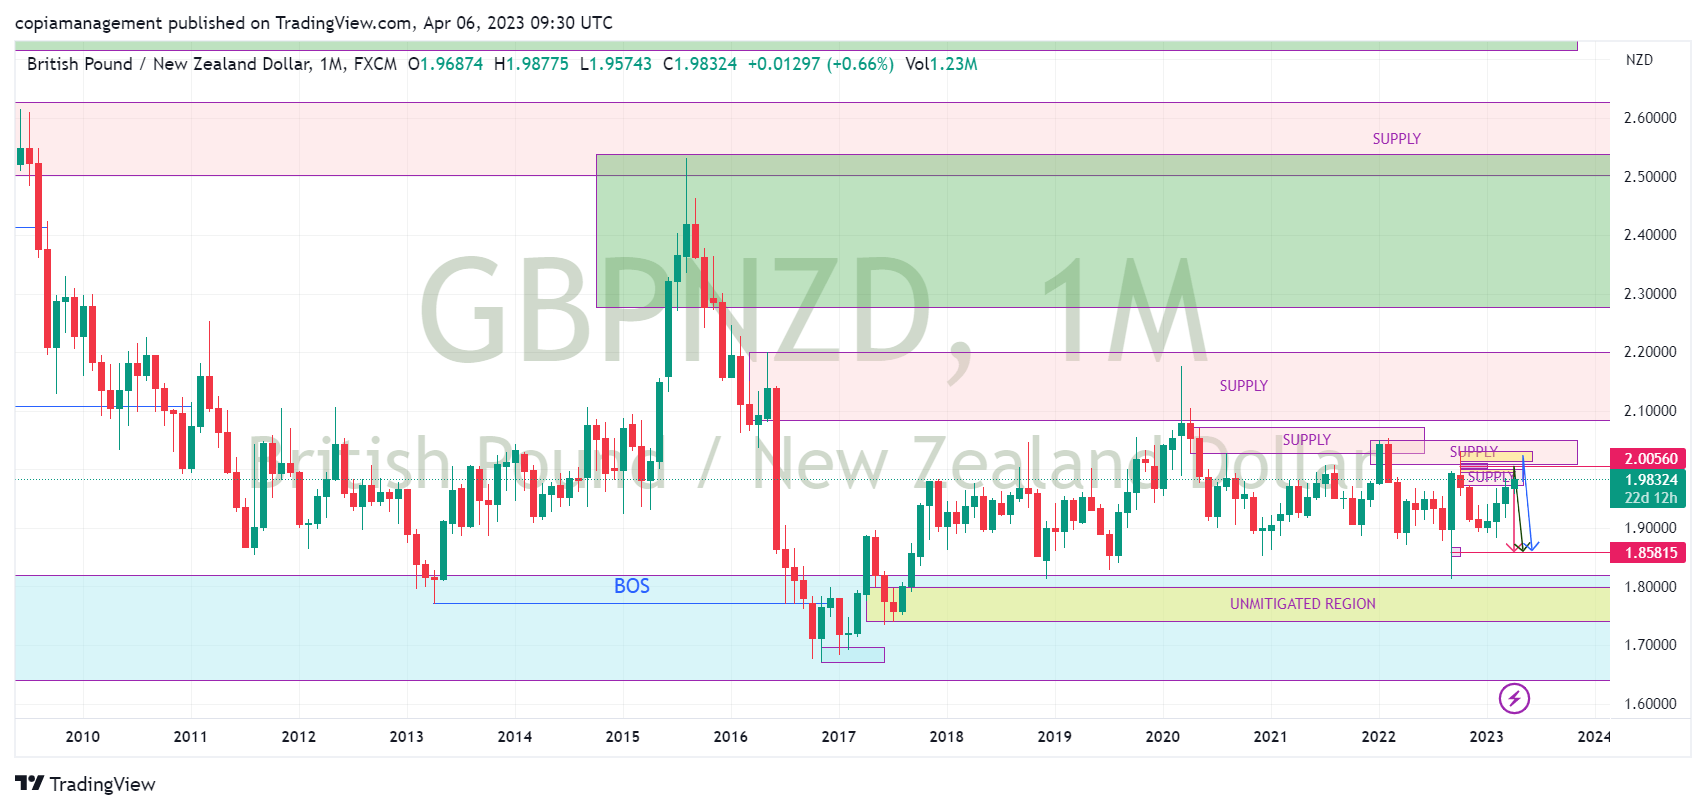 GBPNZD MONTHLY CHART